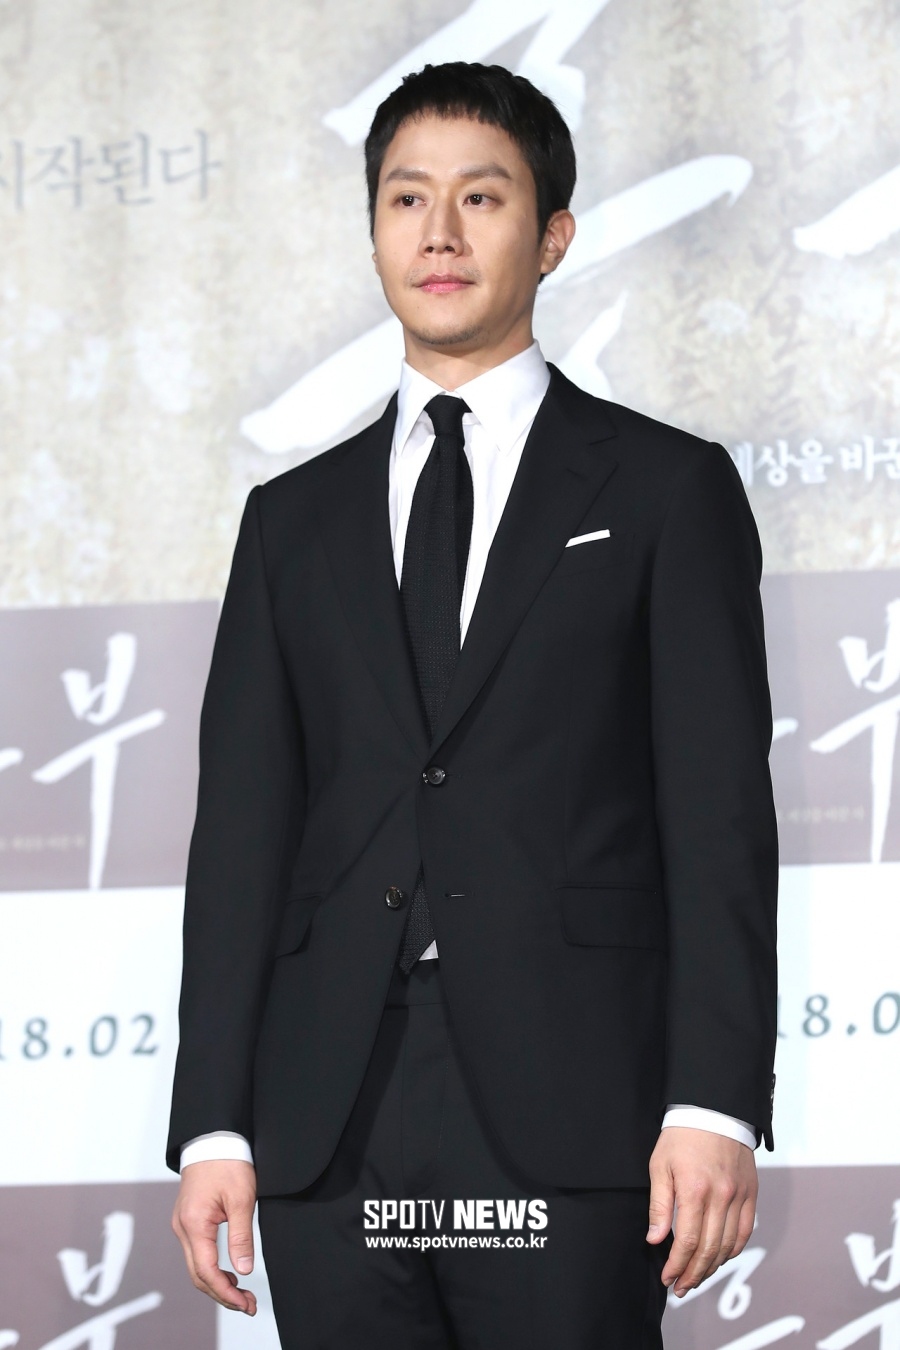 Actor Jung Woo has signed an exclusive contract with BH Entertainment.In addition, Jung Woo is waiting for the release of three films, Hot Blood, Dont Handle With Dirty Money, and Neighbors Village, by Acting the Homicide Detective Myung Deuk, which was filmed in December last year.Jung Woo created the unique character called Chungu in the 2009 movie Wind, and in 2013 TVN drama Respond, 1994, it caused a garbage craze all over the country and attracted genuine charm.He was loved for his attraction, and he also appeared in many films, including the movie Cecibong, Himalayas, Retrial, and Heungbu, and played as a Main actor Actor.In the future, we will continue to do active activities in the screen as well as in the CRT.BH Entertainment said, I am glad to be with Jung Woo Actor.Jung Woo is an Acting Actor with his own unique color, so I will try to meet with the public in a better work. He promised active support for Jung Woo.On the other hand, BH Entertainment is a specialist in the actor specializing in the actor, which includes Lee Byung-hun Han Hyo-joo Han Ji-min Ji-tae Jin-gu, Chu Ja-hyun, Park Sung-hoon, Park Hae-soo, Gong Seung-yeon, Kim Go-eun, Kim Yong-ji, Management.=